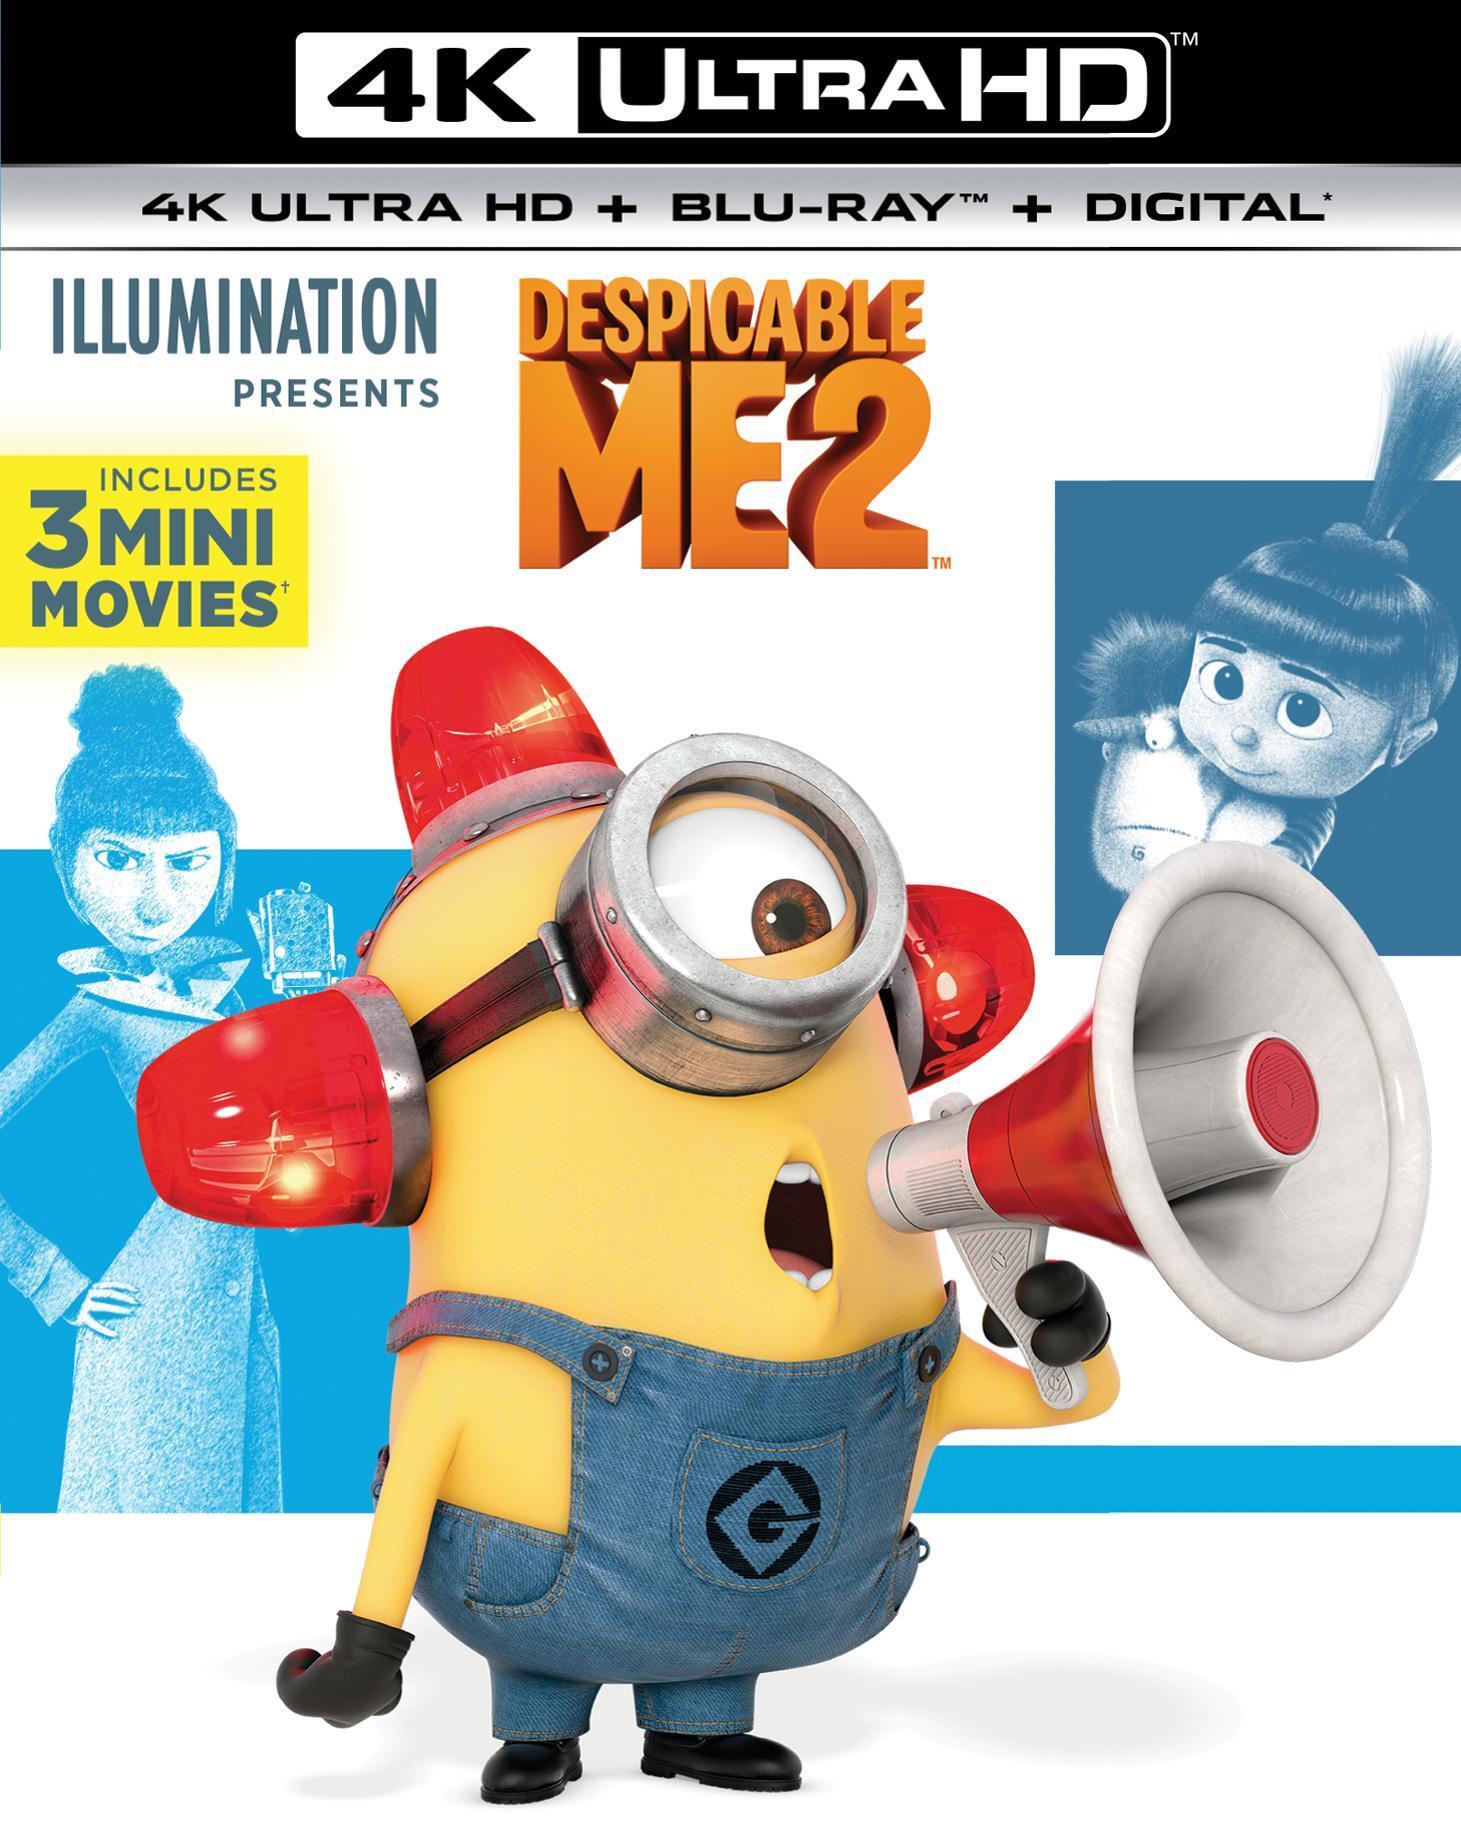 Despicable Me 2 (4K Ultra HD) - UHD [ 2013 ]  - Animation Movies On 4K Ultra HD Blu-ray - Movies On GRUV